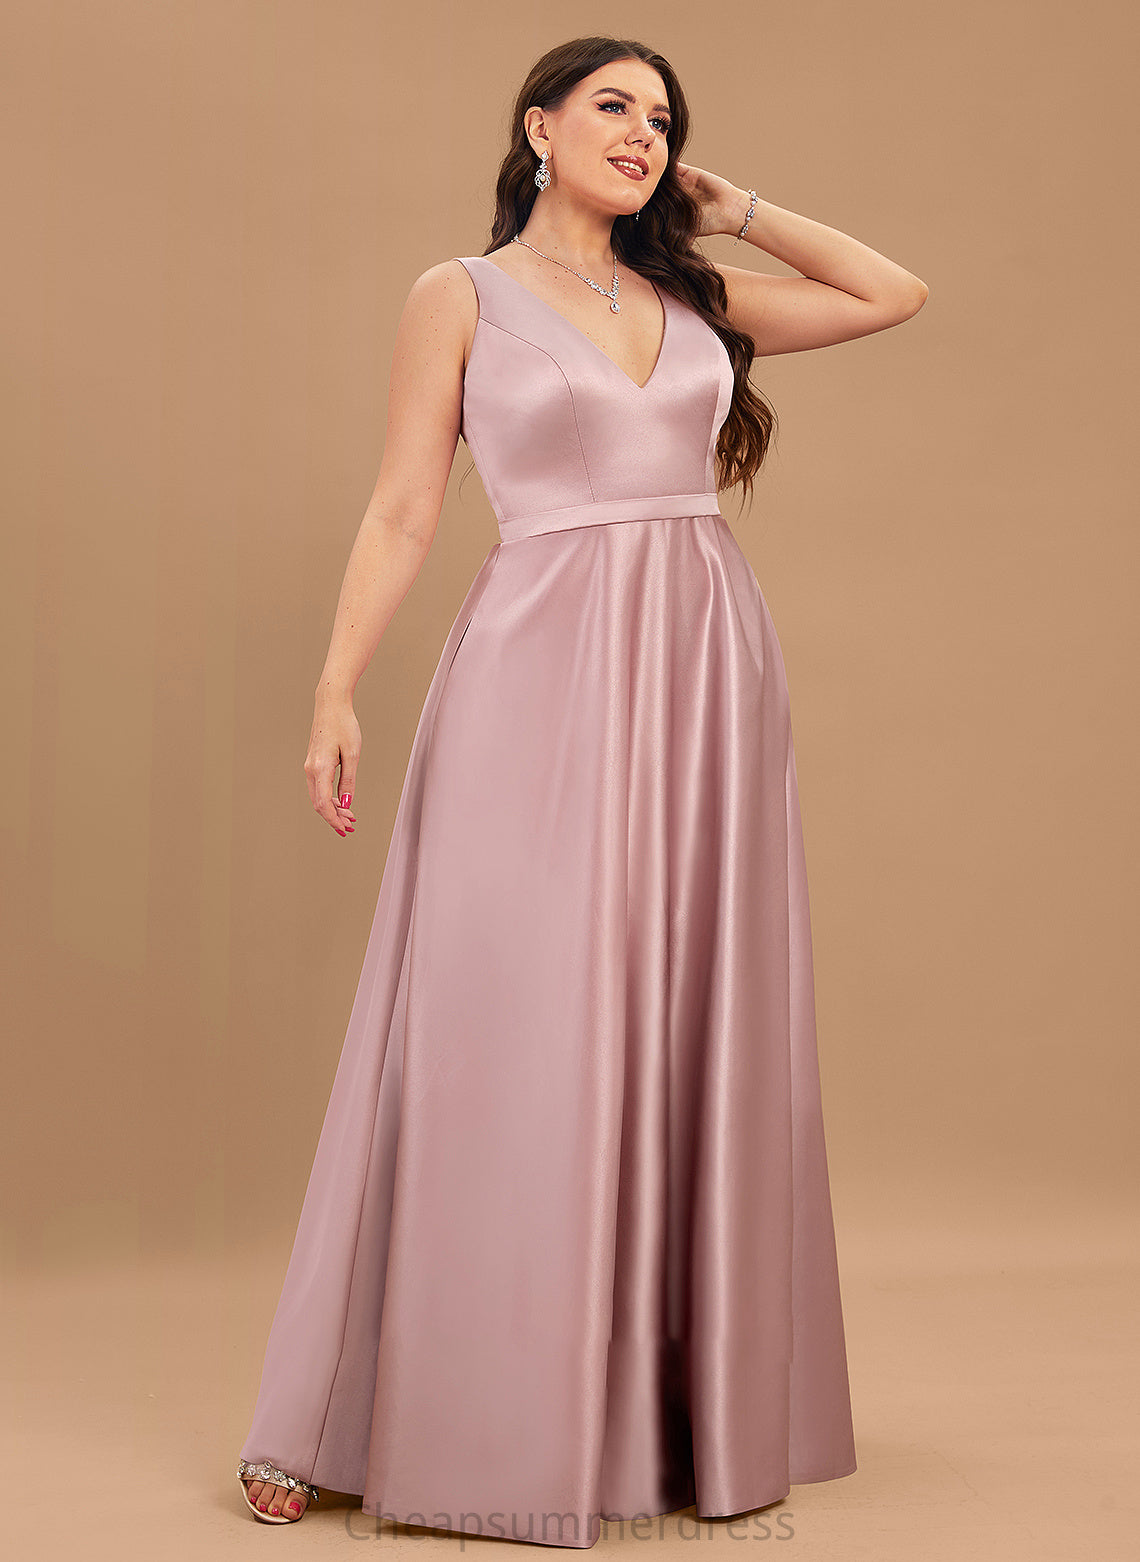 Satin V-neck Ball-Gown/Princess Pockets With Prom Dresses Erica Floor-Length